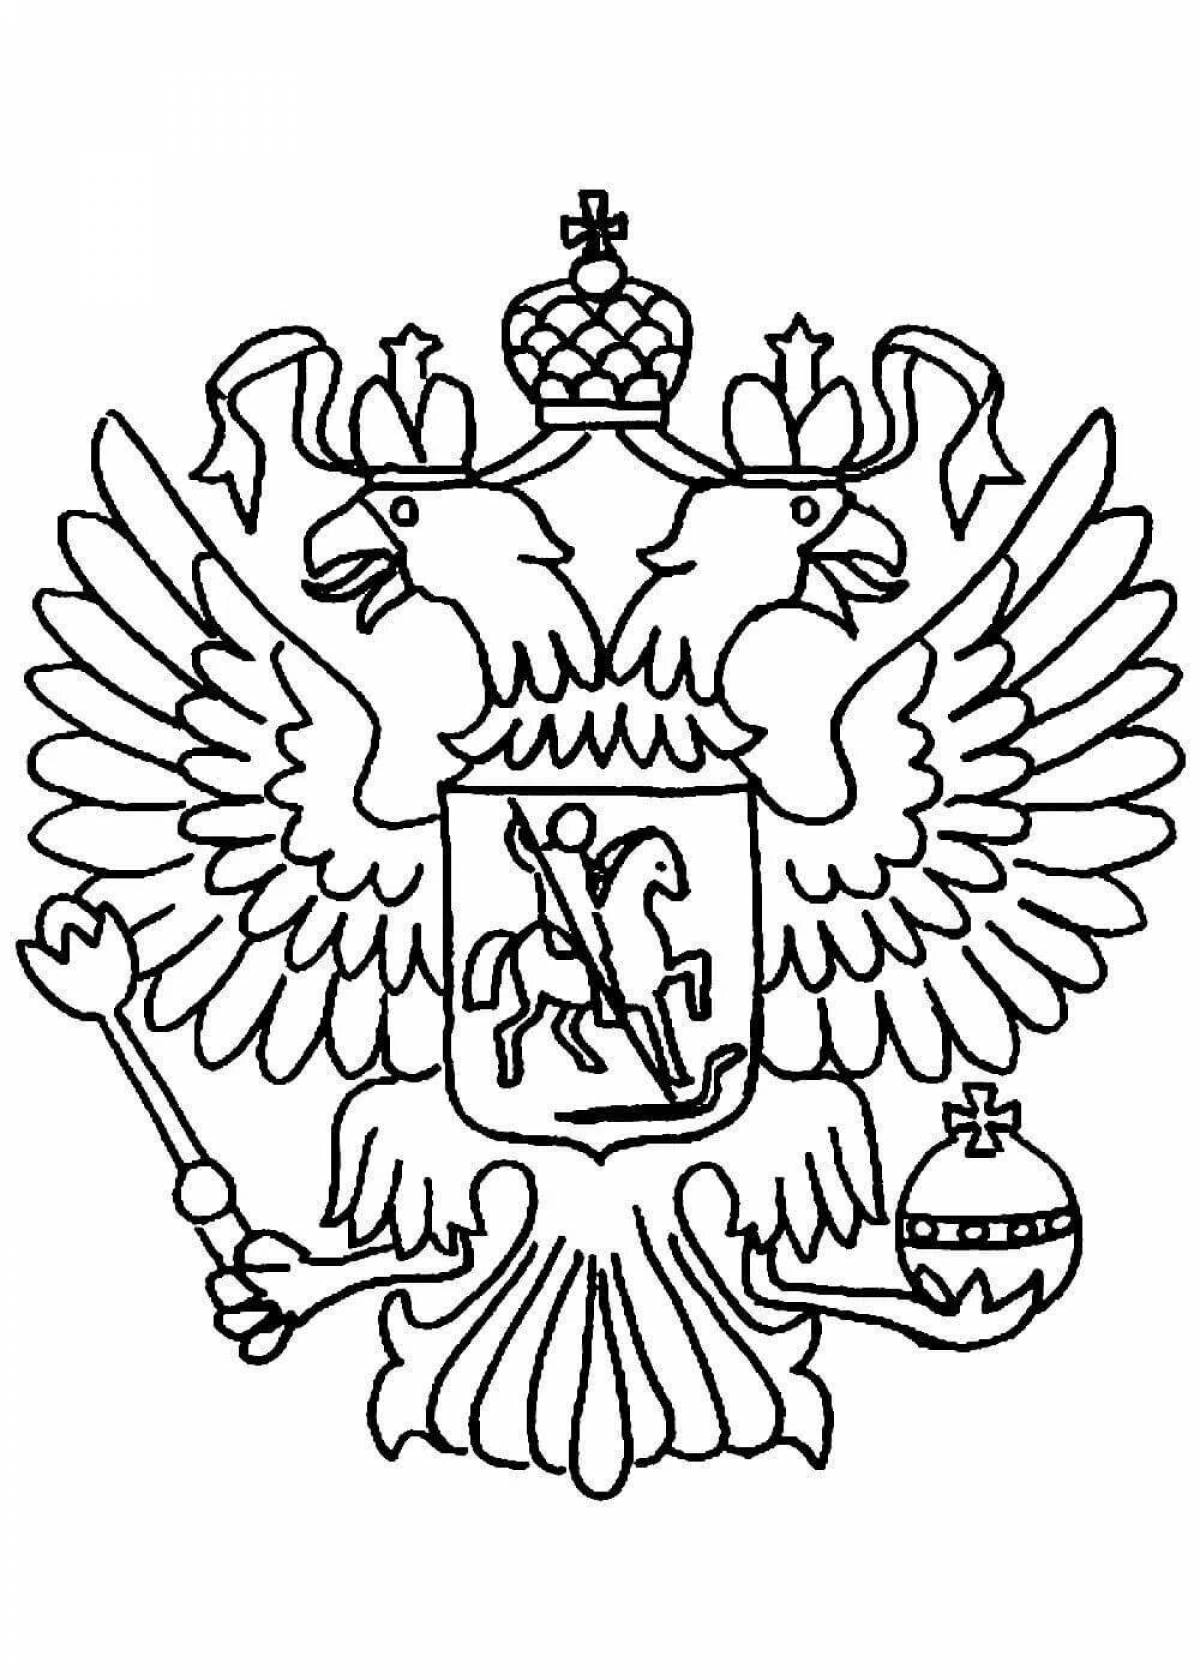 Entertaining coat of arms of Russia for preschoolers